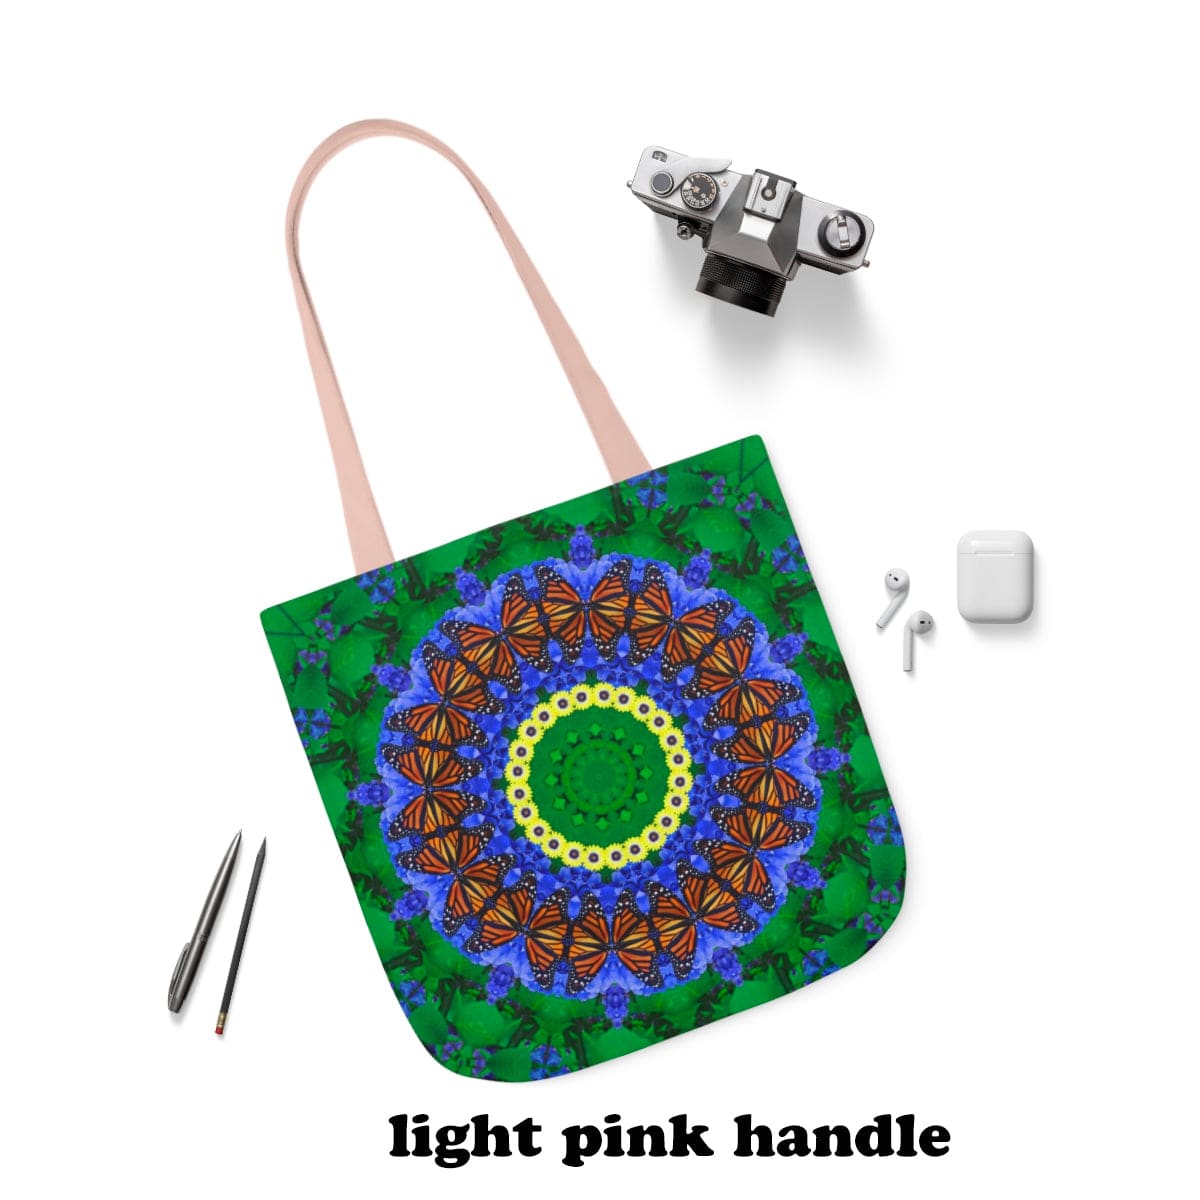 Graphic Butterfly Tote Bag  Cute and Functional For Everyday, Work And Shopping Butterfly Effect light pink handle